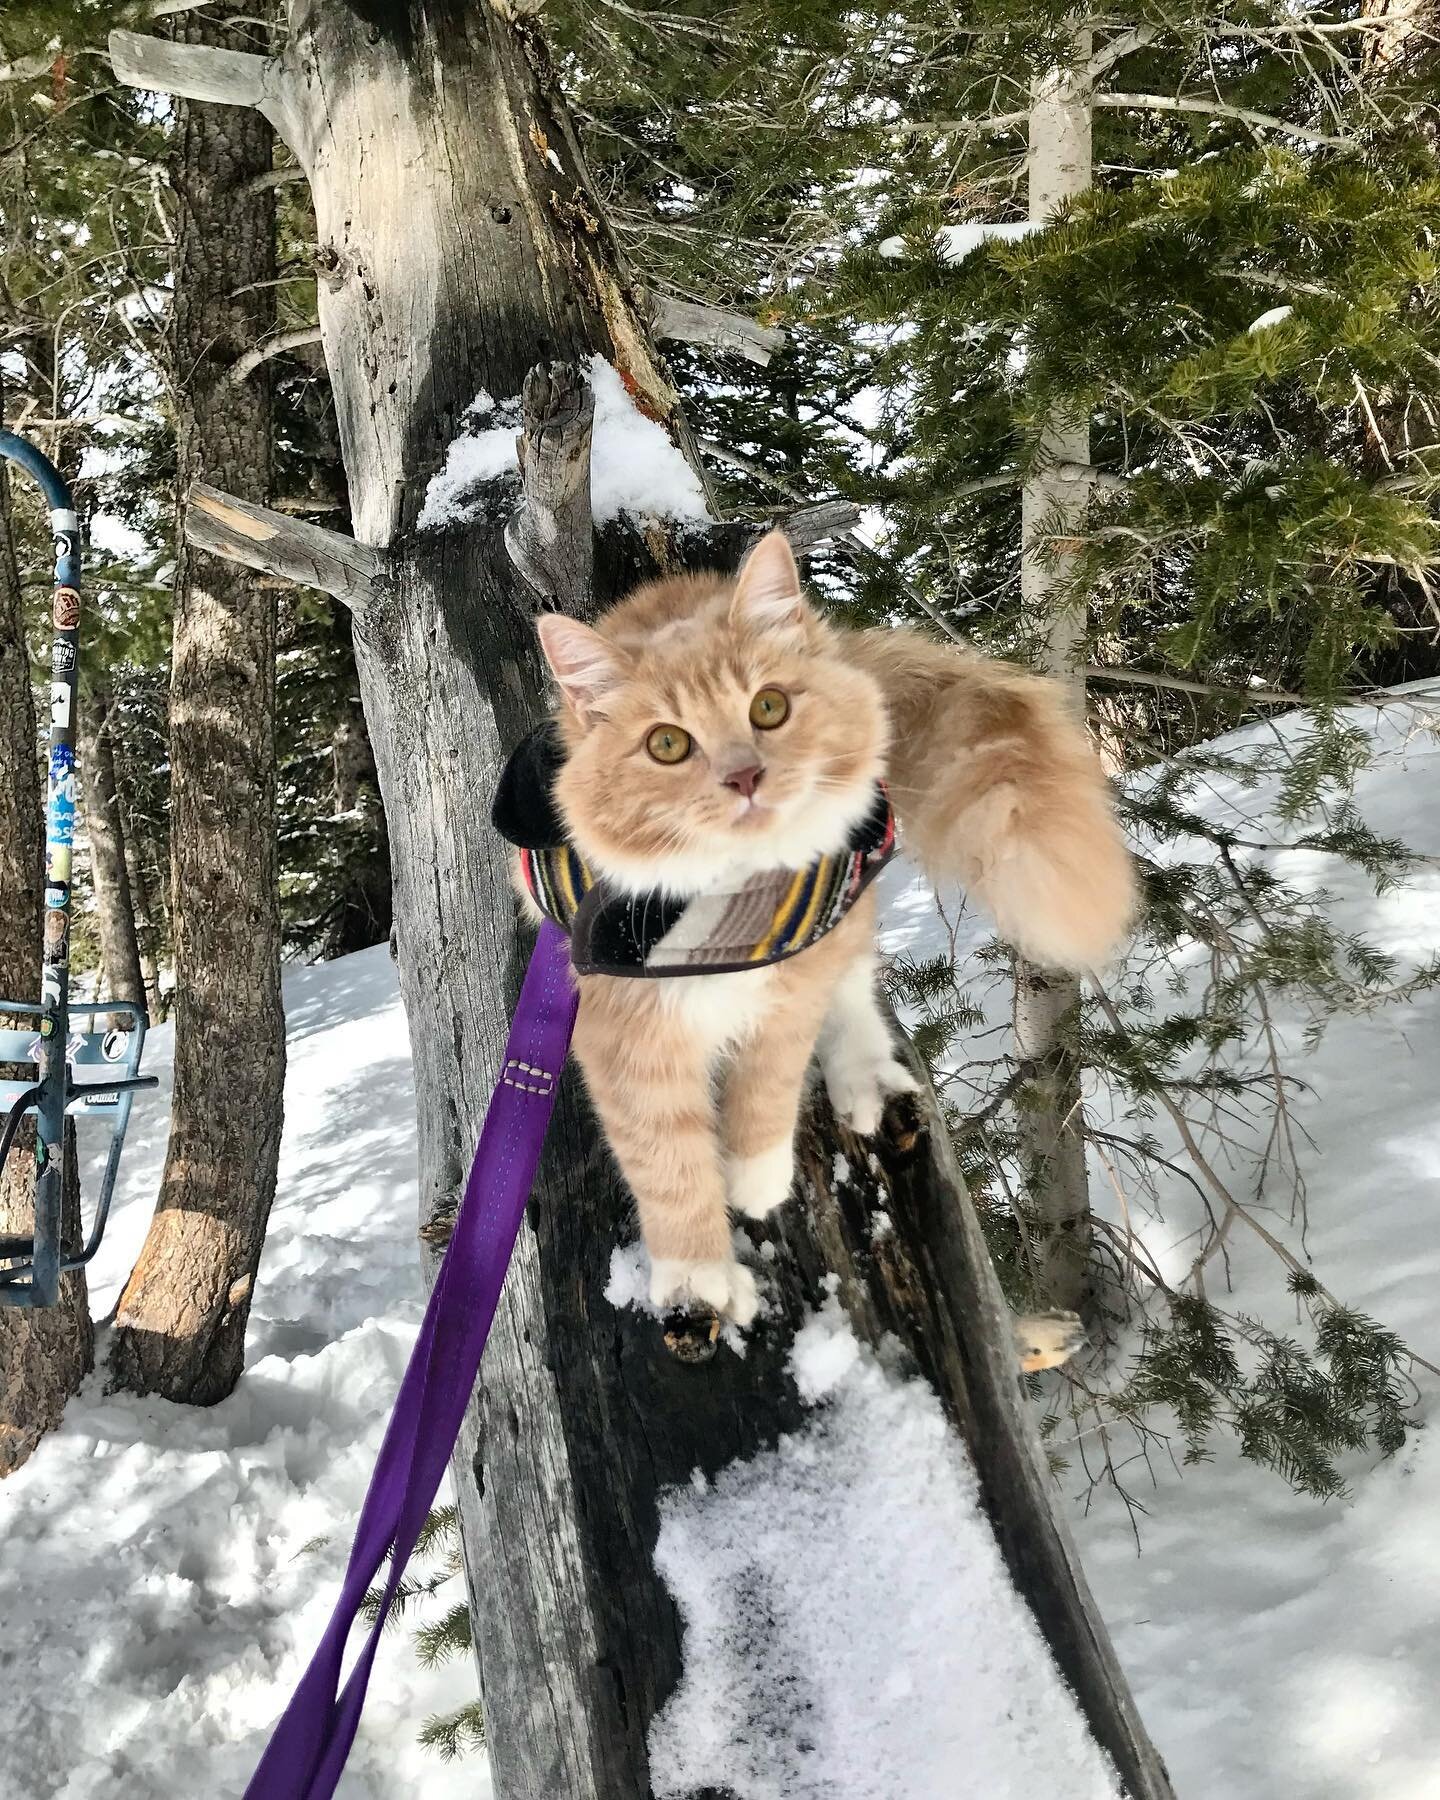 Throwback! This was Petra&rsquo;s first day skiing! 🤘

#aspensnowmass #skiingcat #aspenhighlands #adventurecat #coolcat #meow #meowtaineer